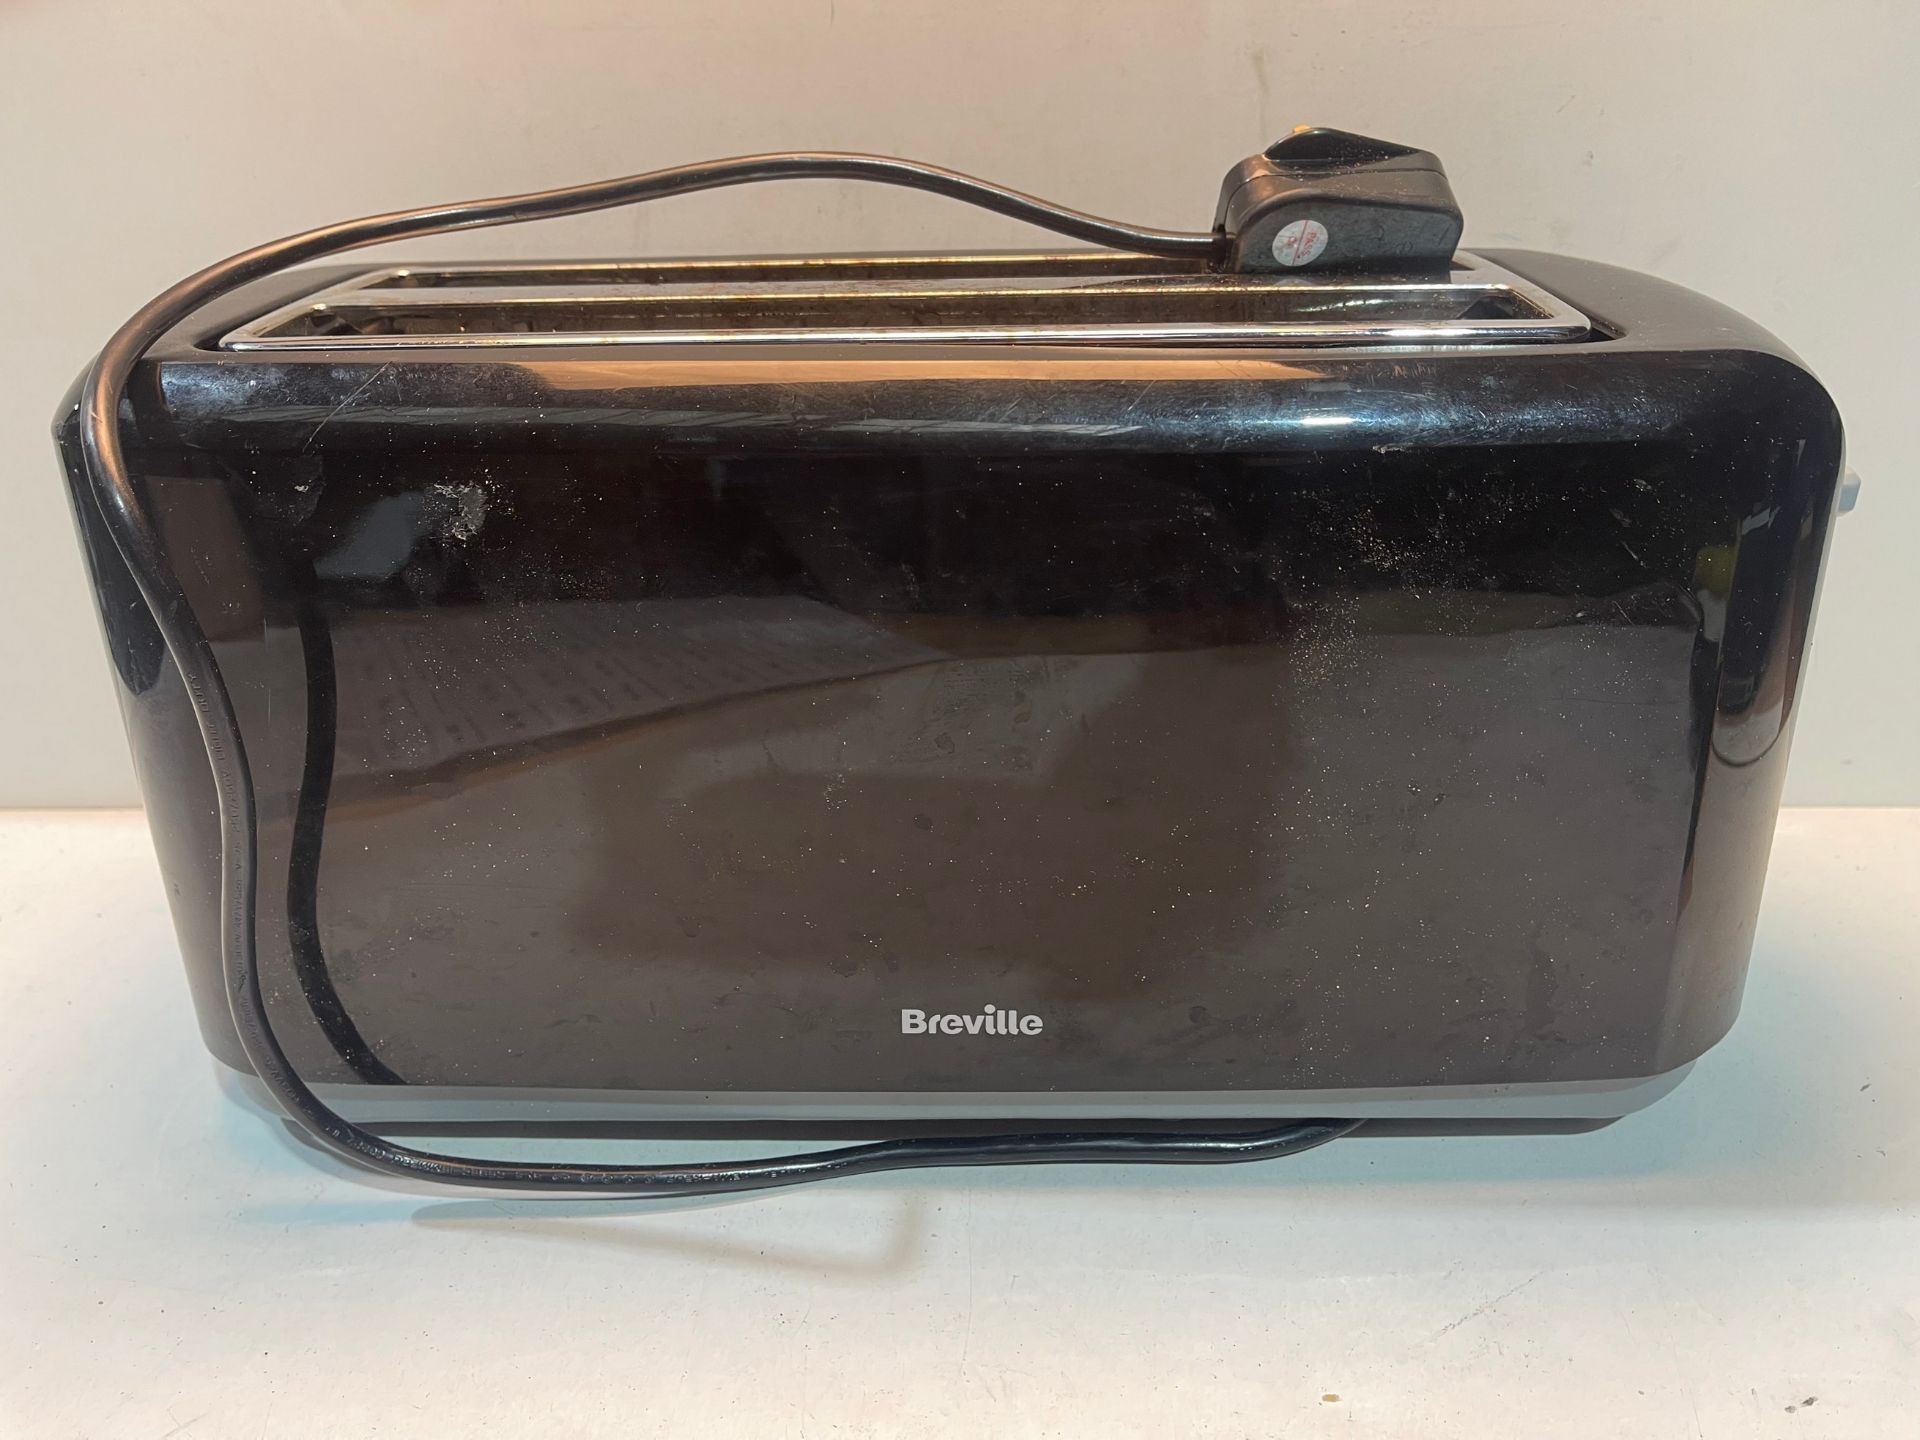 Breville 4-Slice Toaster, 2 Long Slots, High-Lift and Variable Width, Black [VTT233] Â£8.75Condition